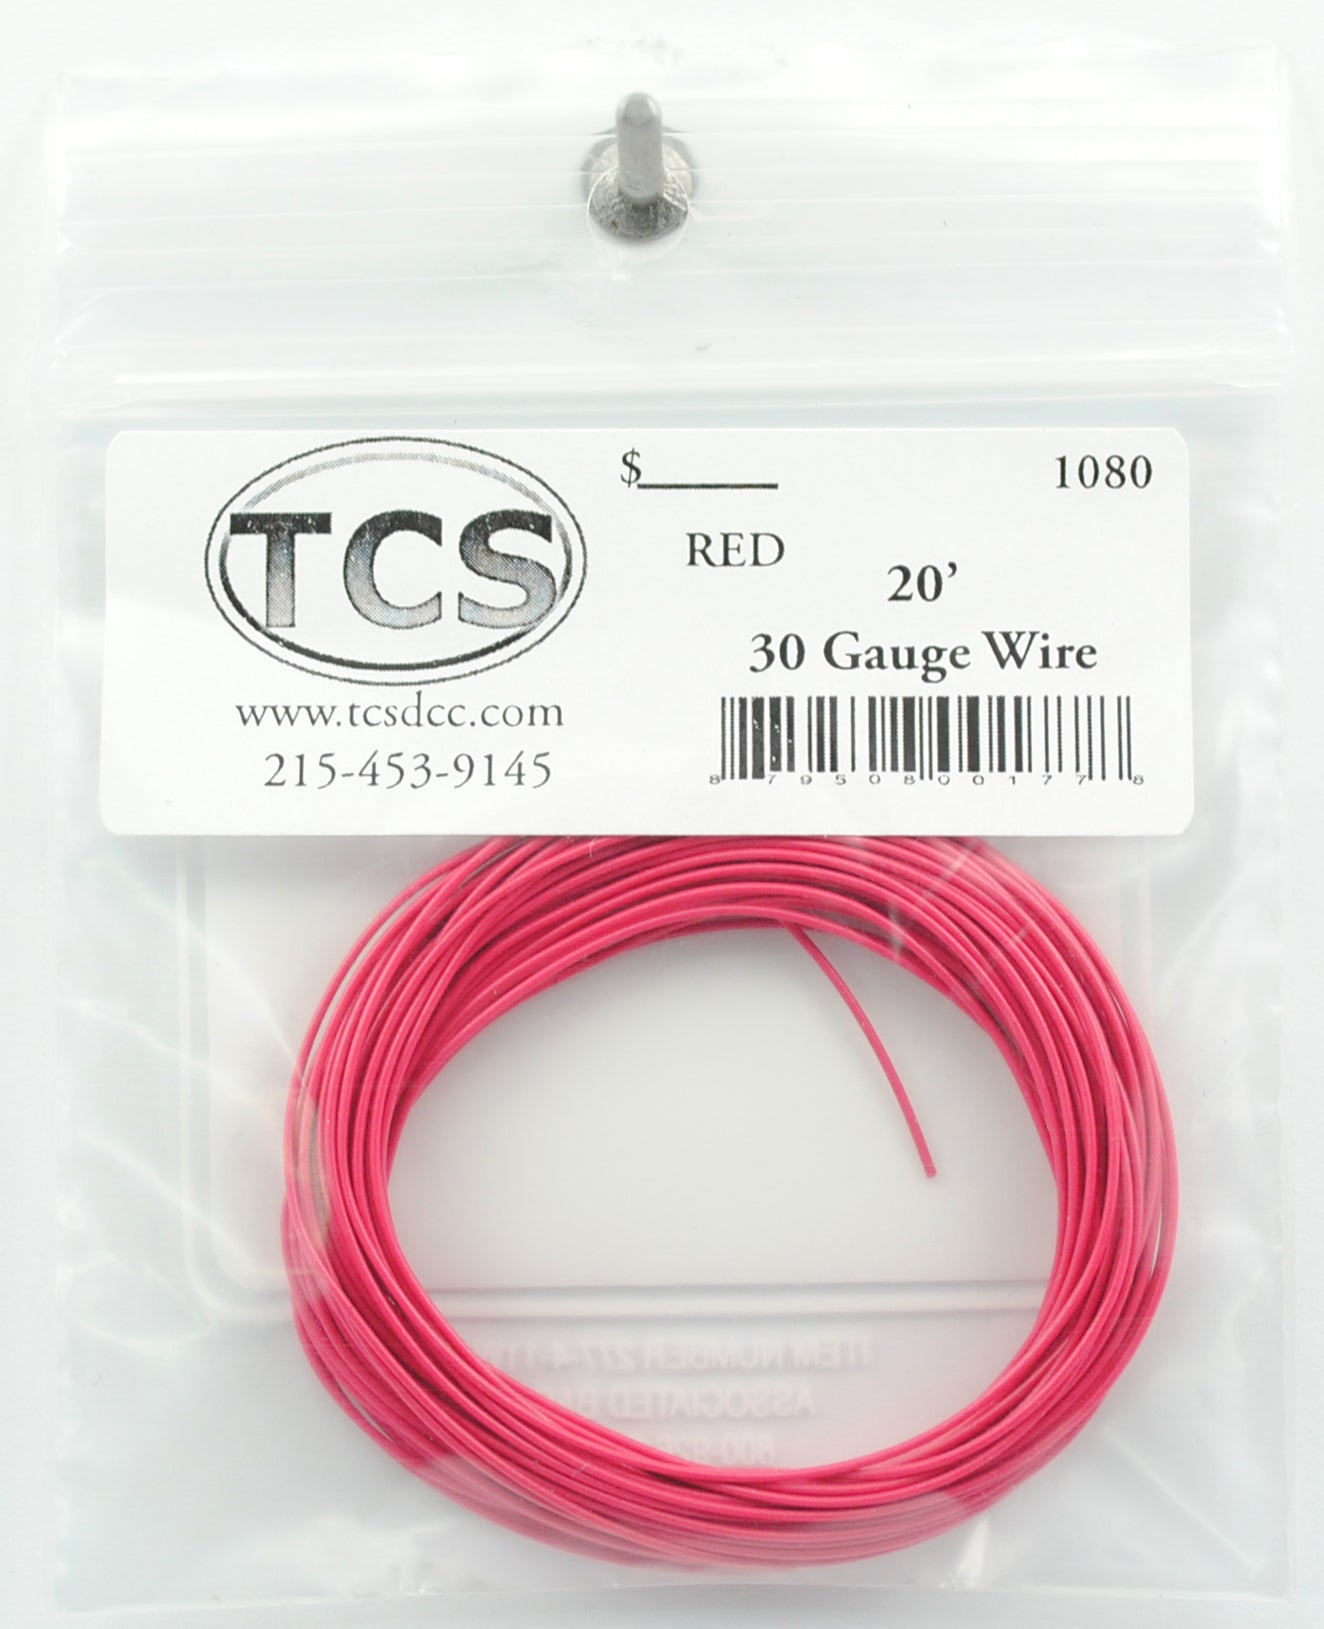 Train Control Systems 1080 Red  20' of 30 Gauge Wire